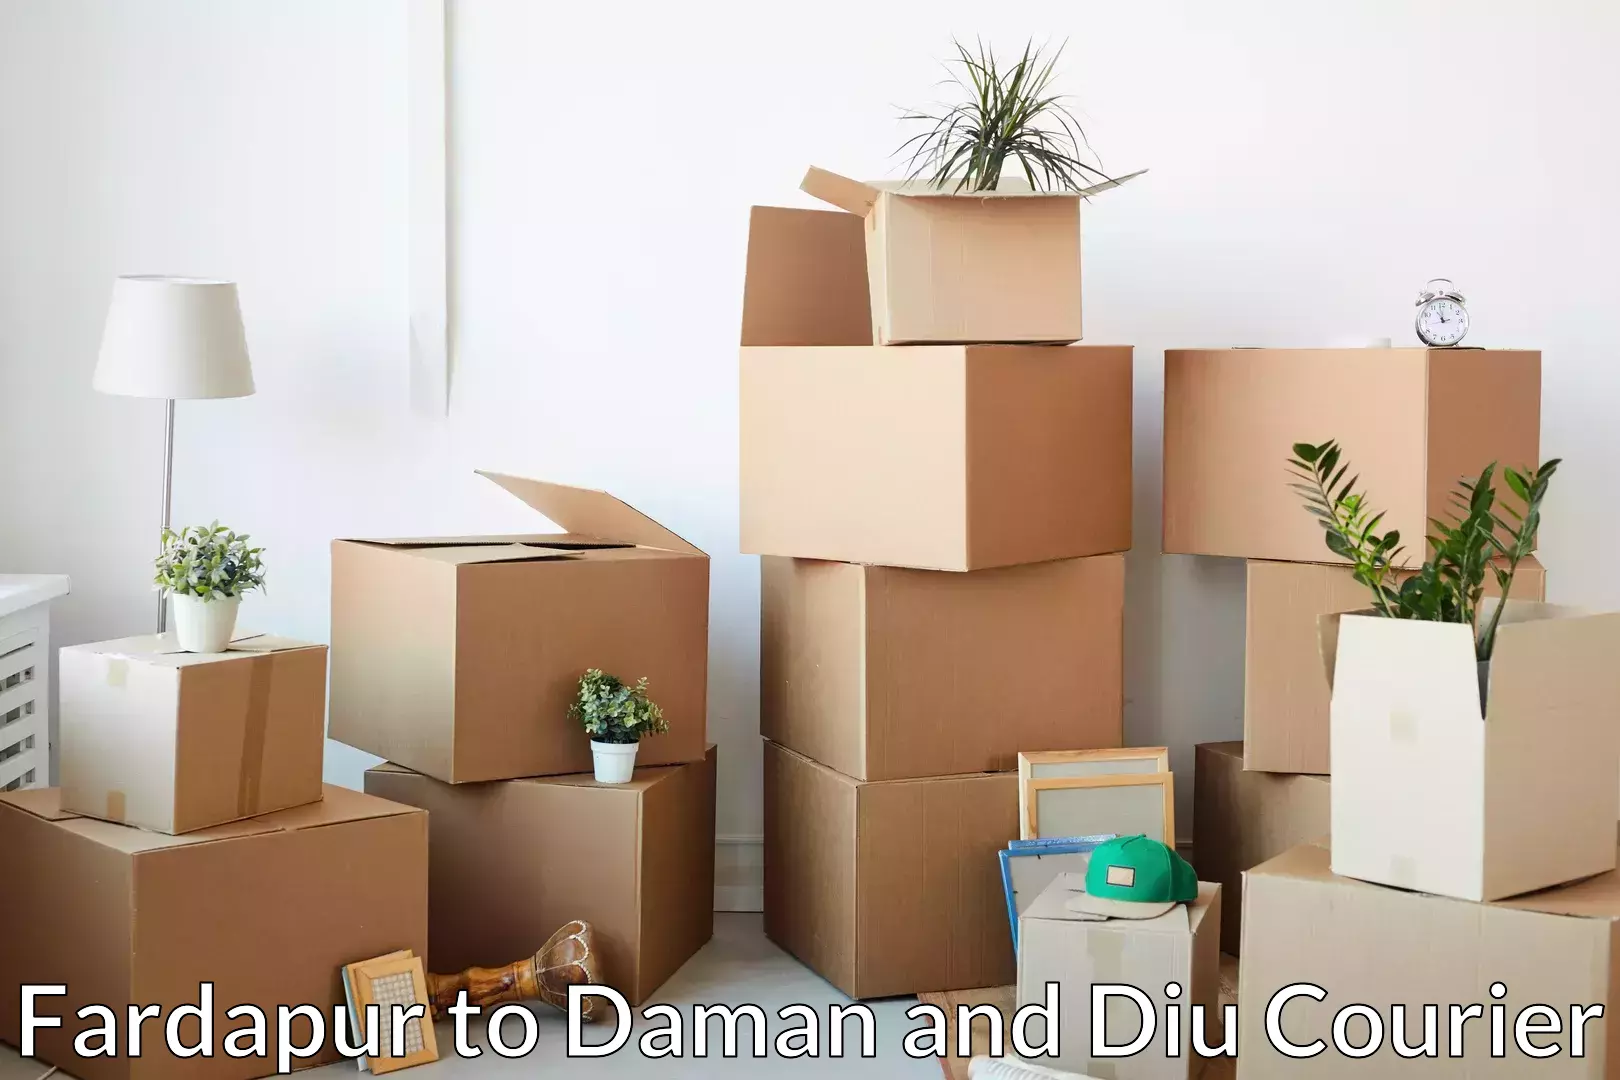 Home shifting services in Fardapur to Diu